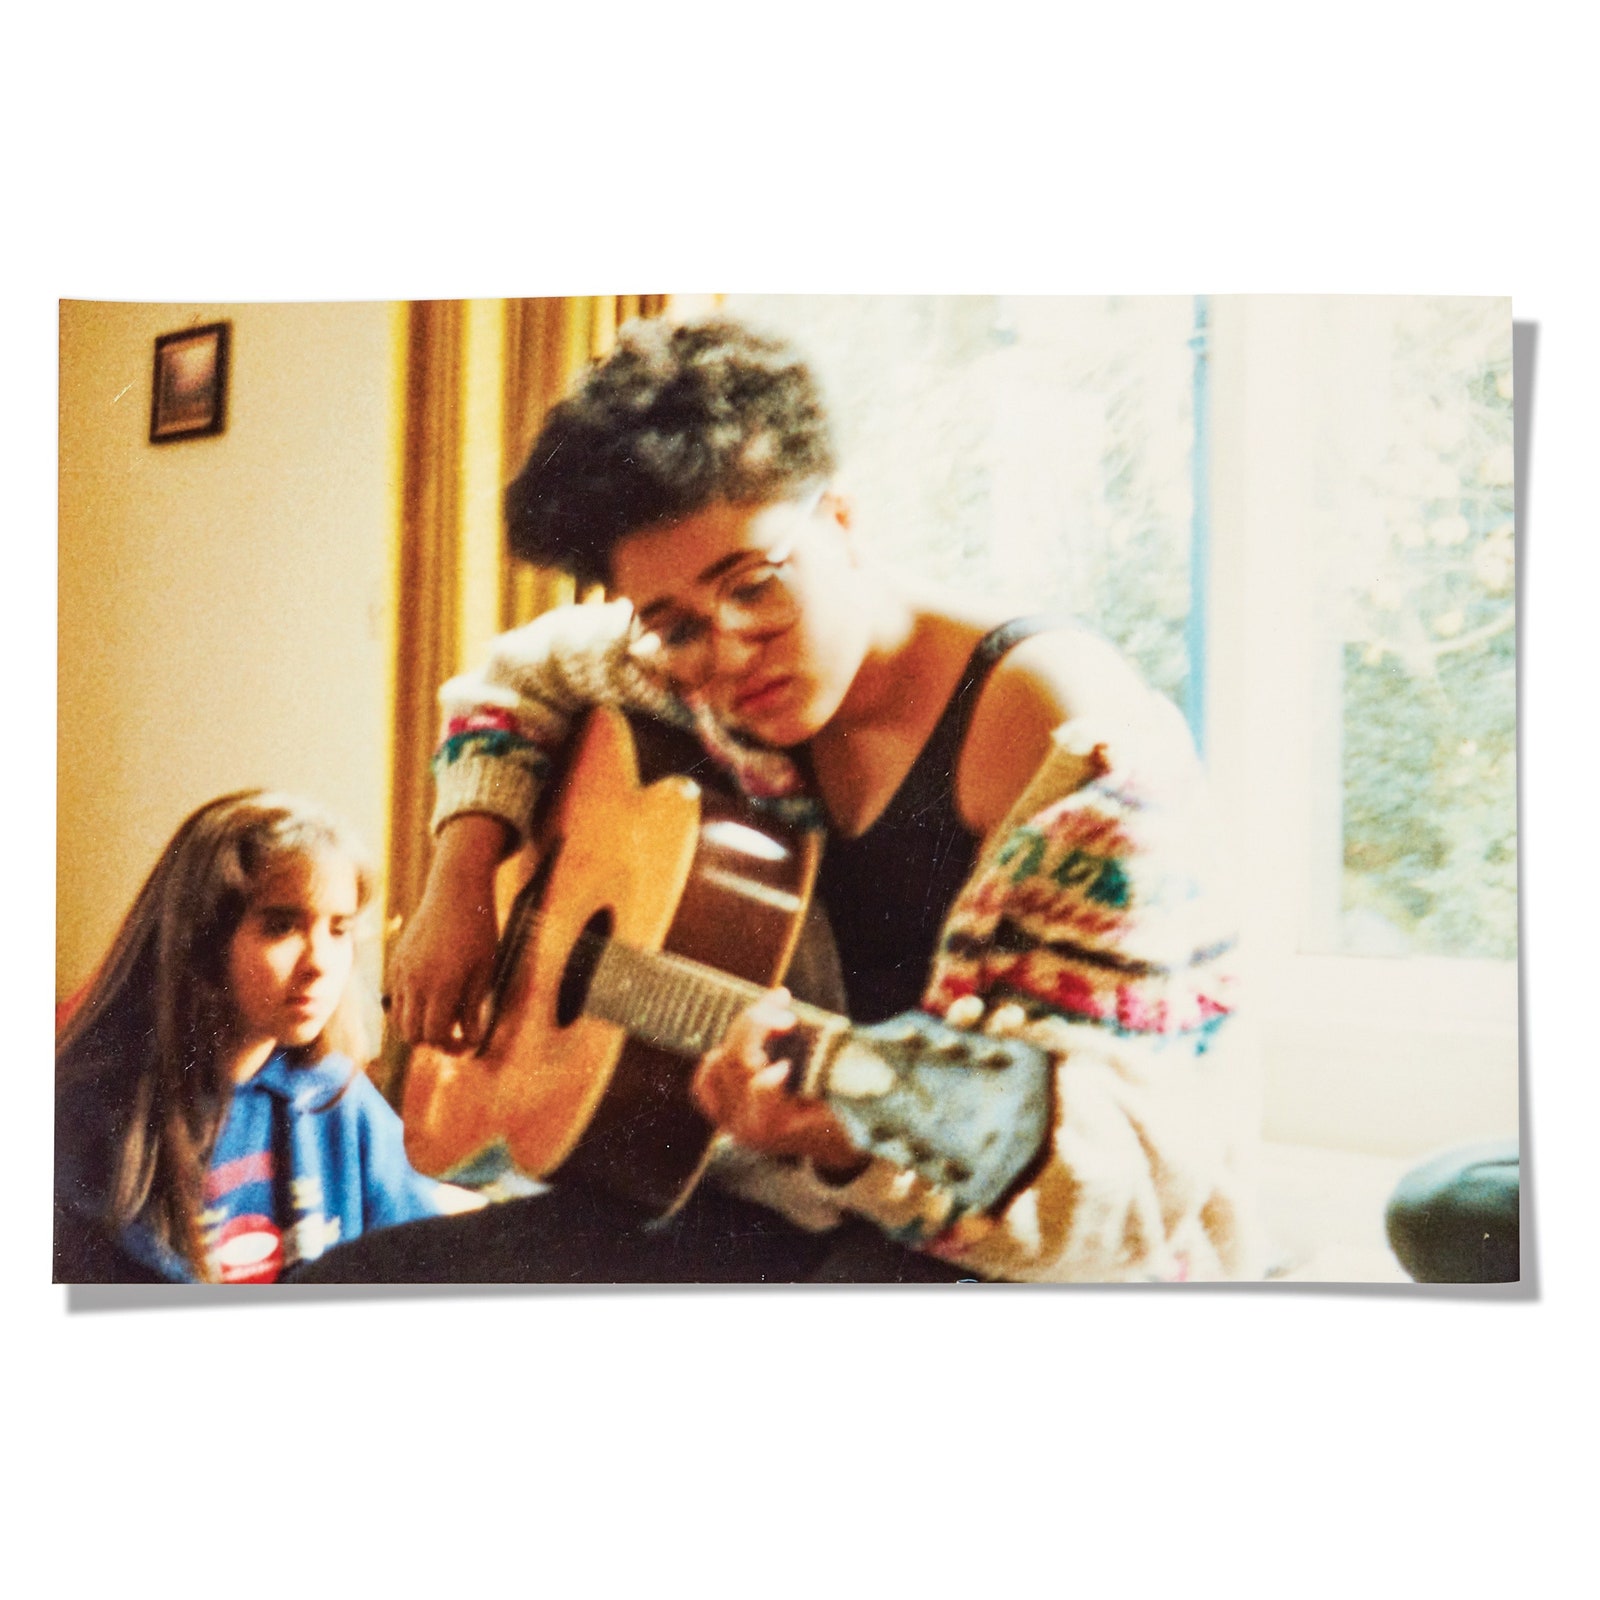 A scan of a photograph of Zadie Smith in her youth holding a guitar.